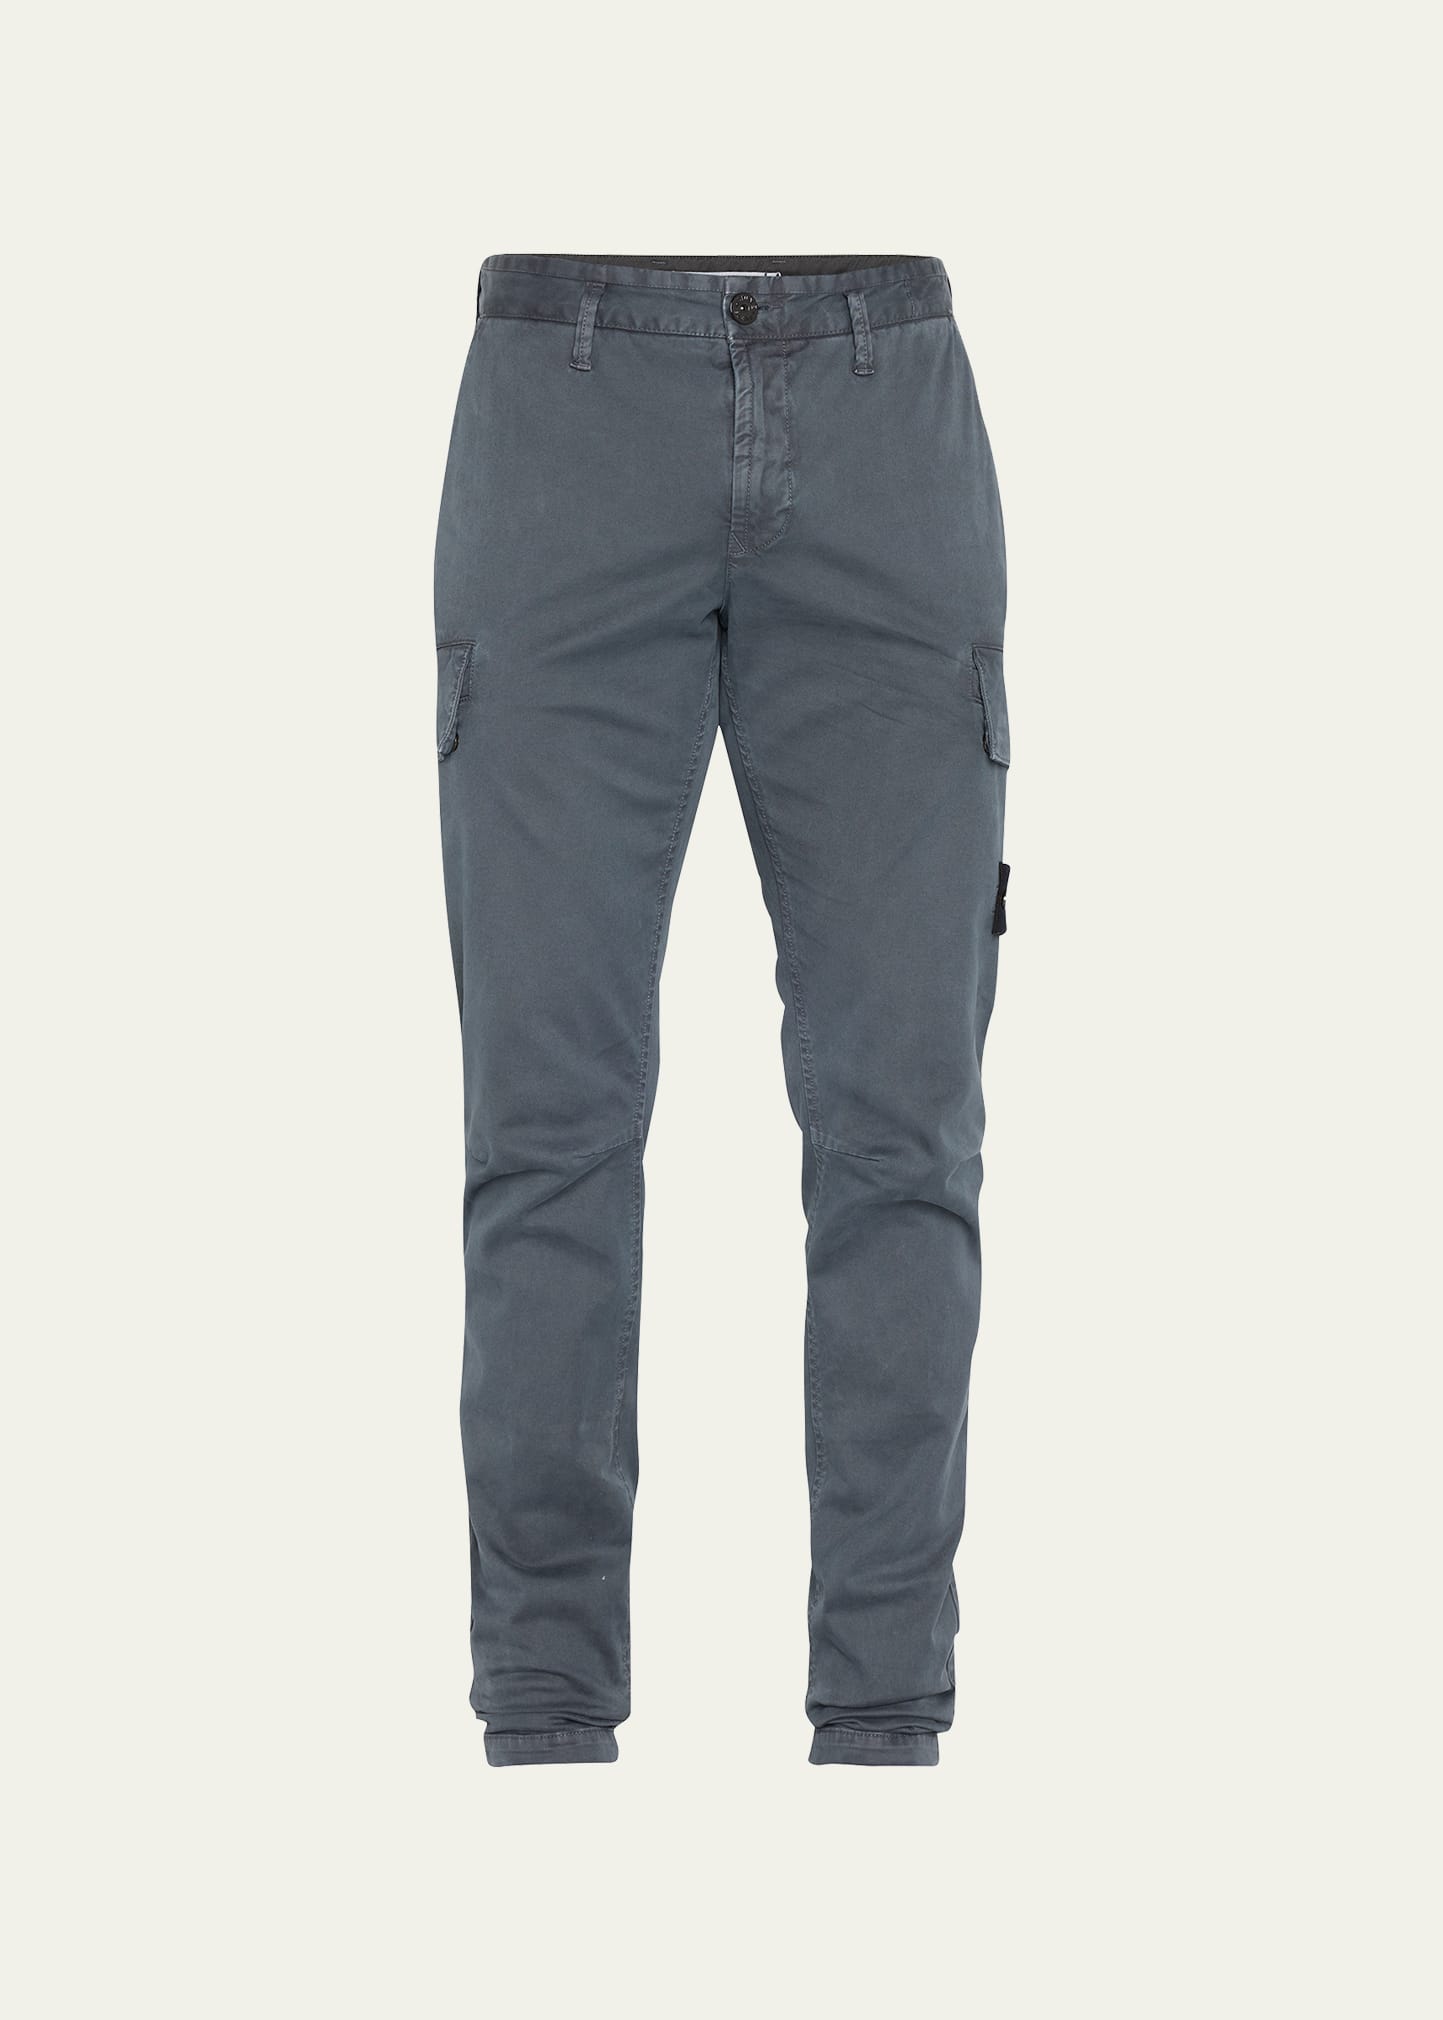 Stone Island Men's Chino Cargo Trousers In Charcoal